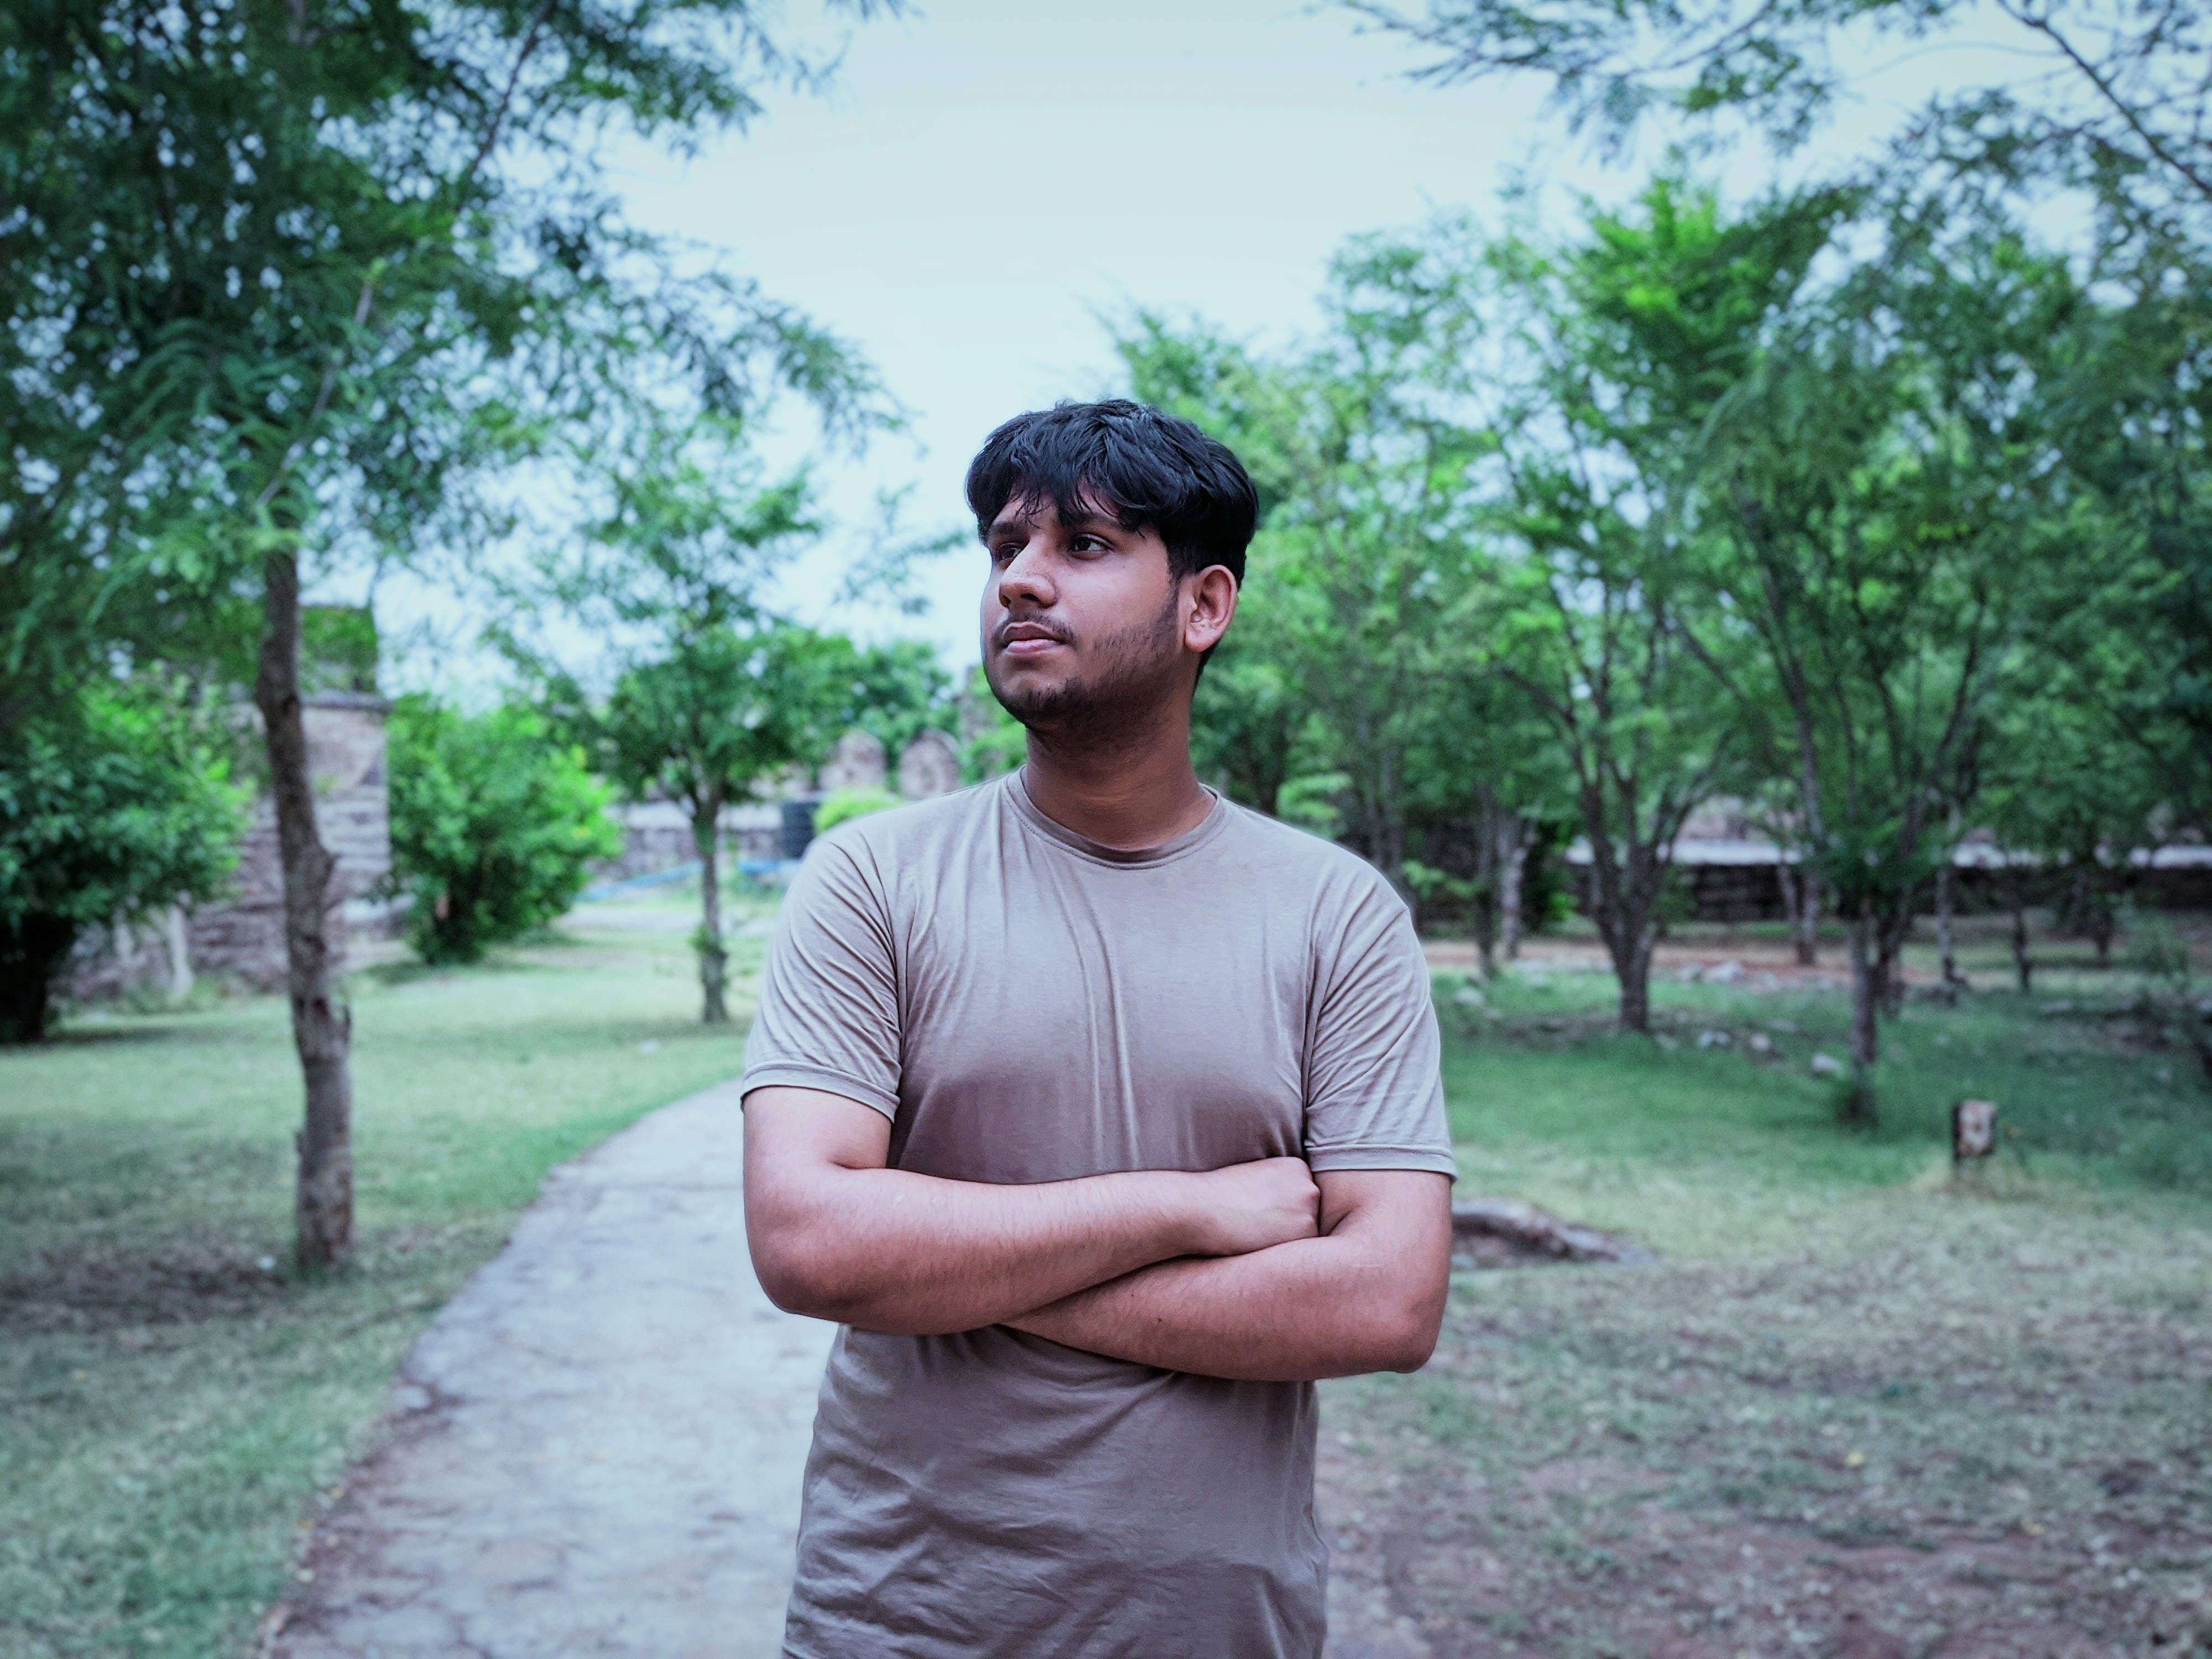 This is Ilias Sami (In Bengali: ইলিয়াস সামি; Birthday: 29th October 2002, in Kushtia Sadar, Bangladesh), a Professional Digital Marketer and SEO Expert from Bangladesh. I am 19 years old in 2022. Studying at Dhaka Polytechnic Institute in CSE.